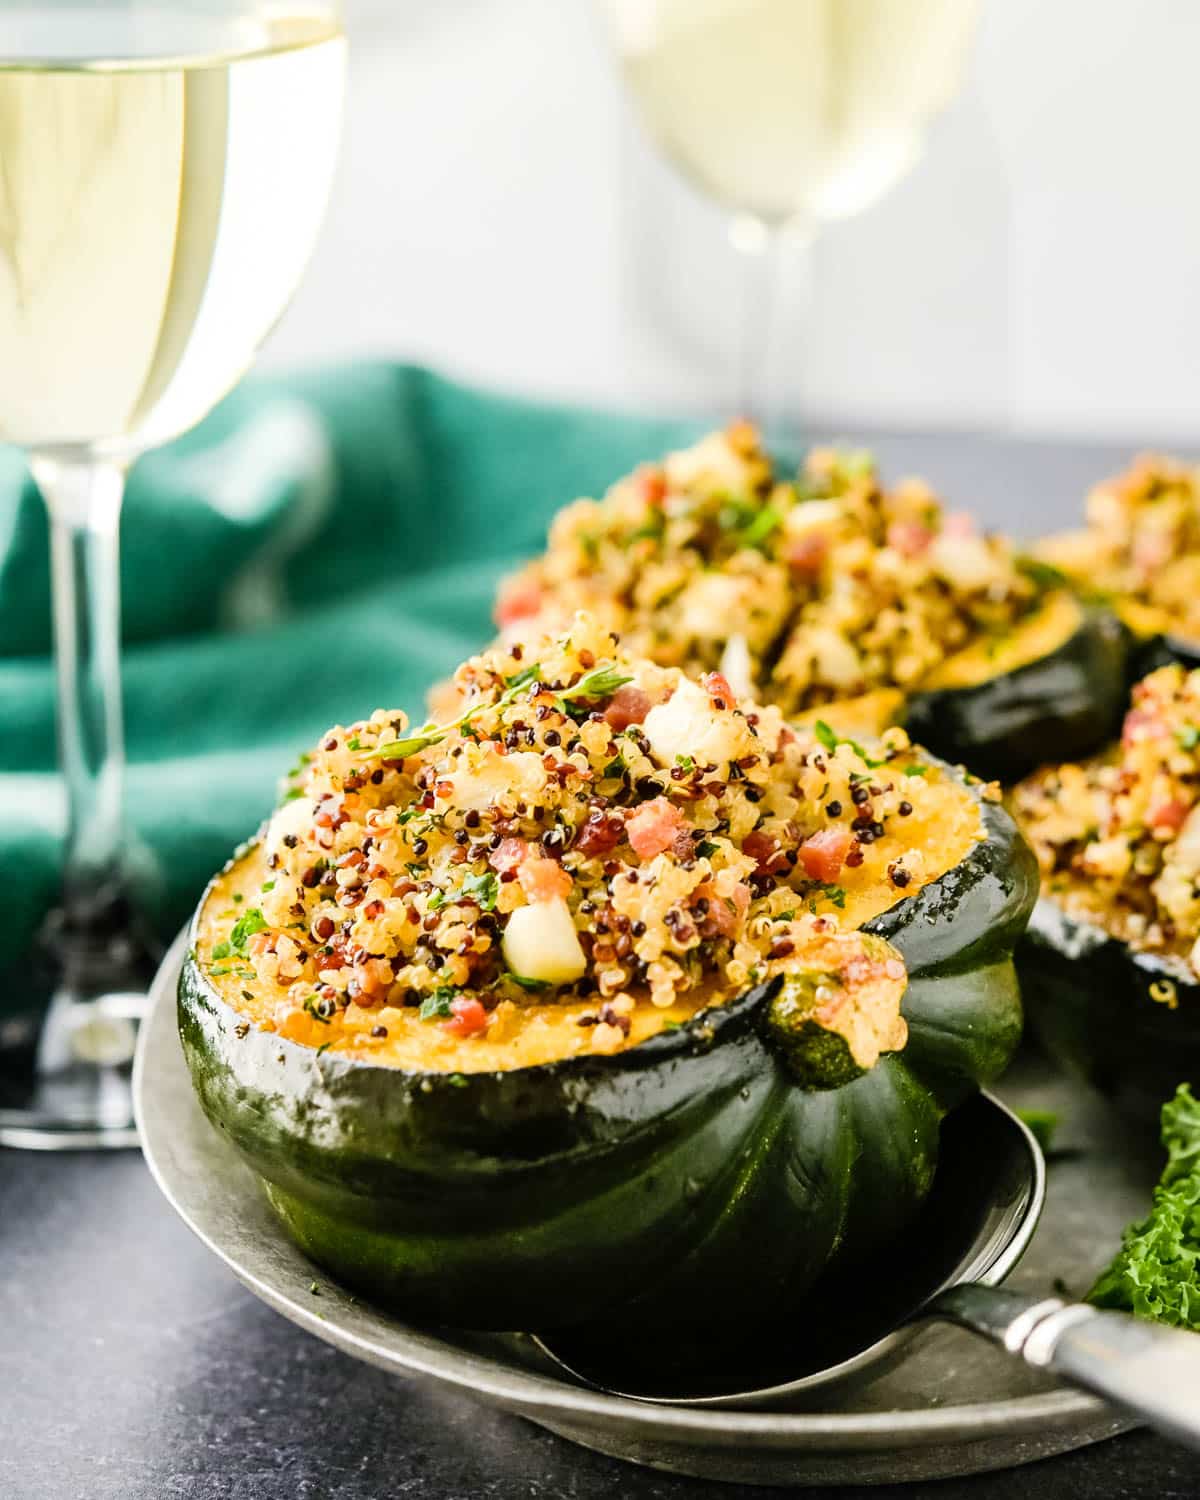 We are serving stuffed acorn squash on a platter.